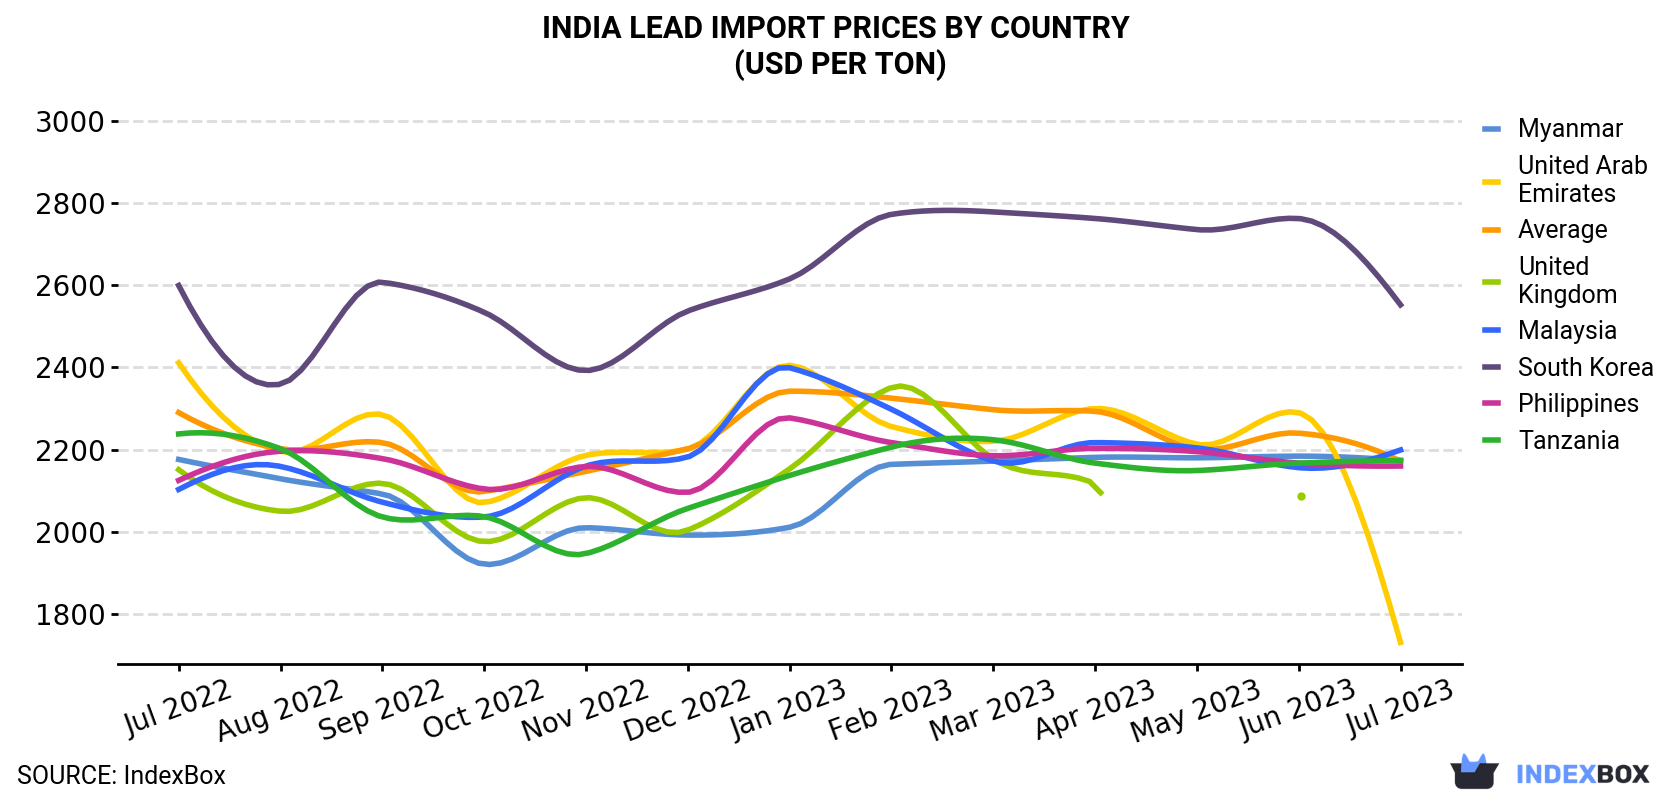 India Lead Import Prices By Country (USD Per Ton)